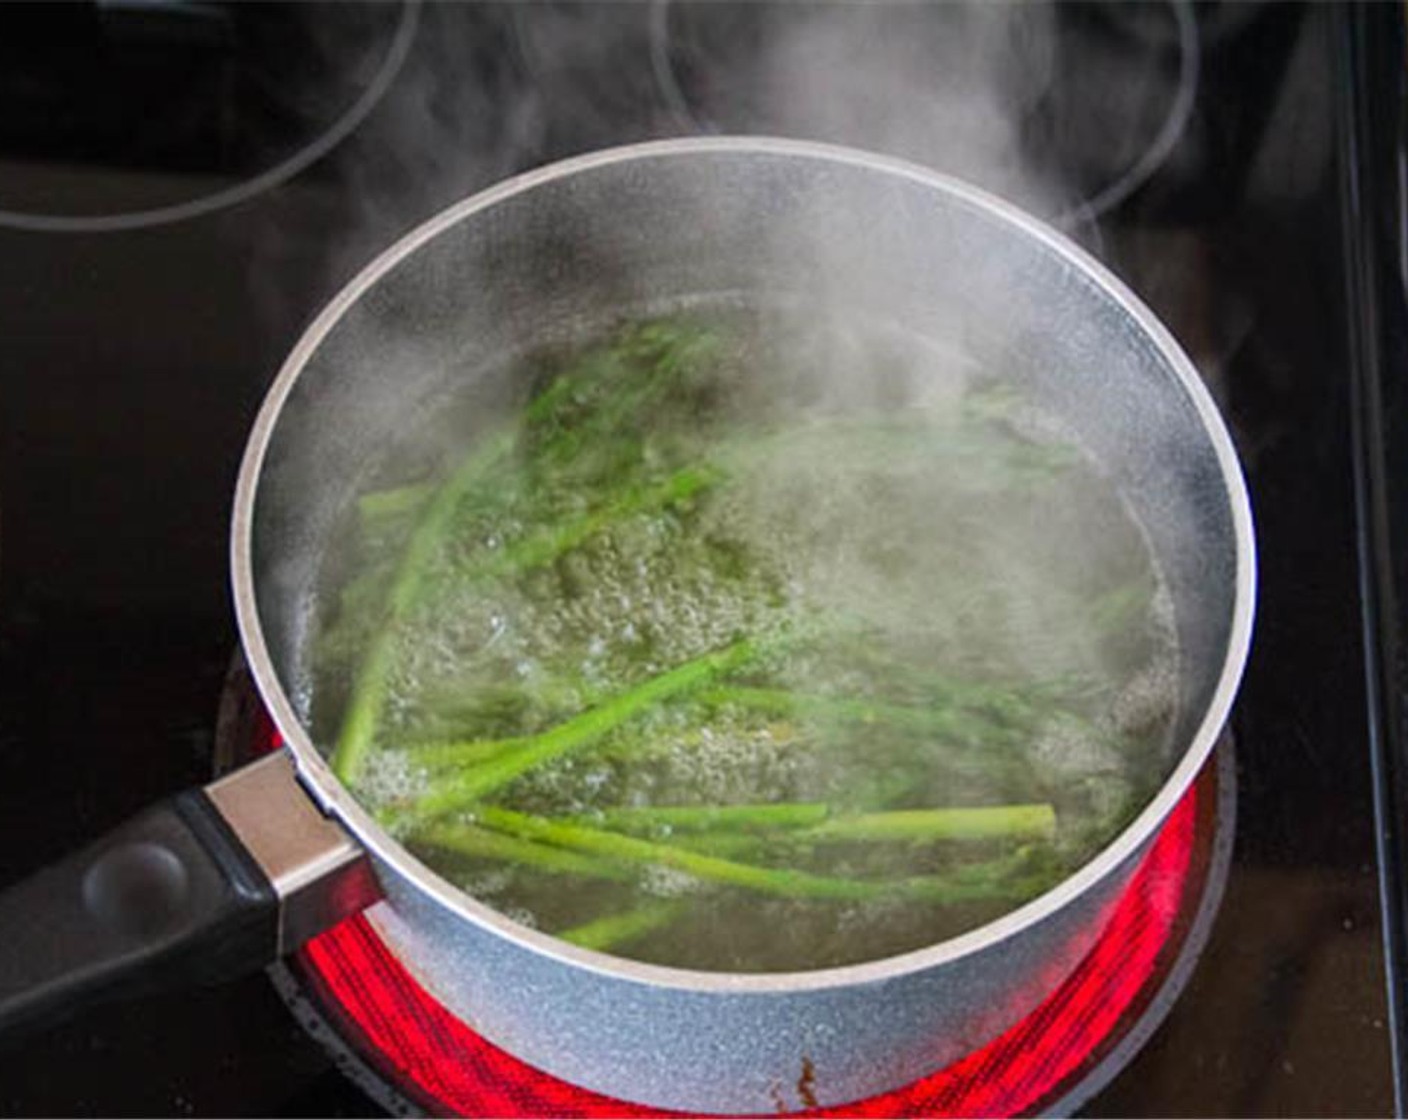 step 4 Bring a pot of water to boil. Wash the Asparagus (3/4 cup) and cut 1-2 inches off the end. Blanch them in boiling water for 3 minutes. Cut into 2-inch pieces.